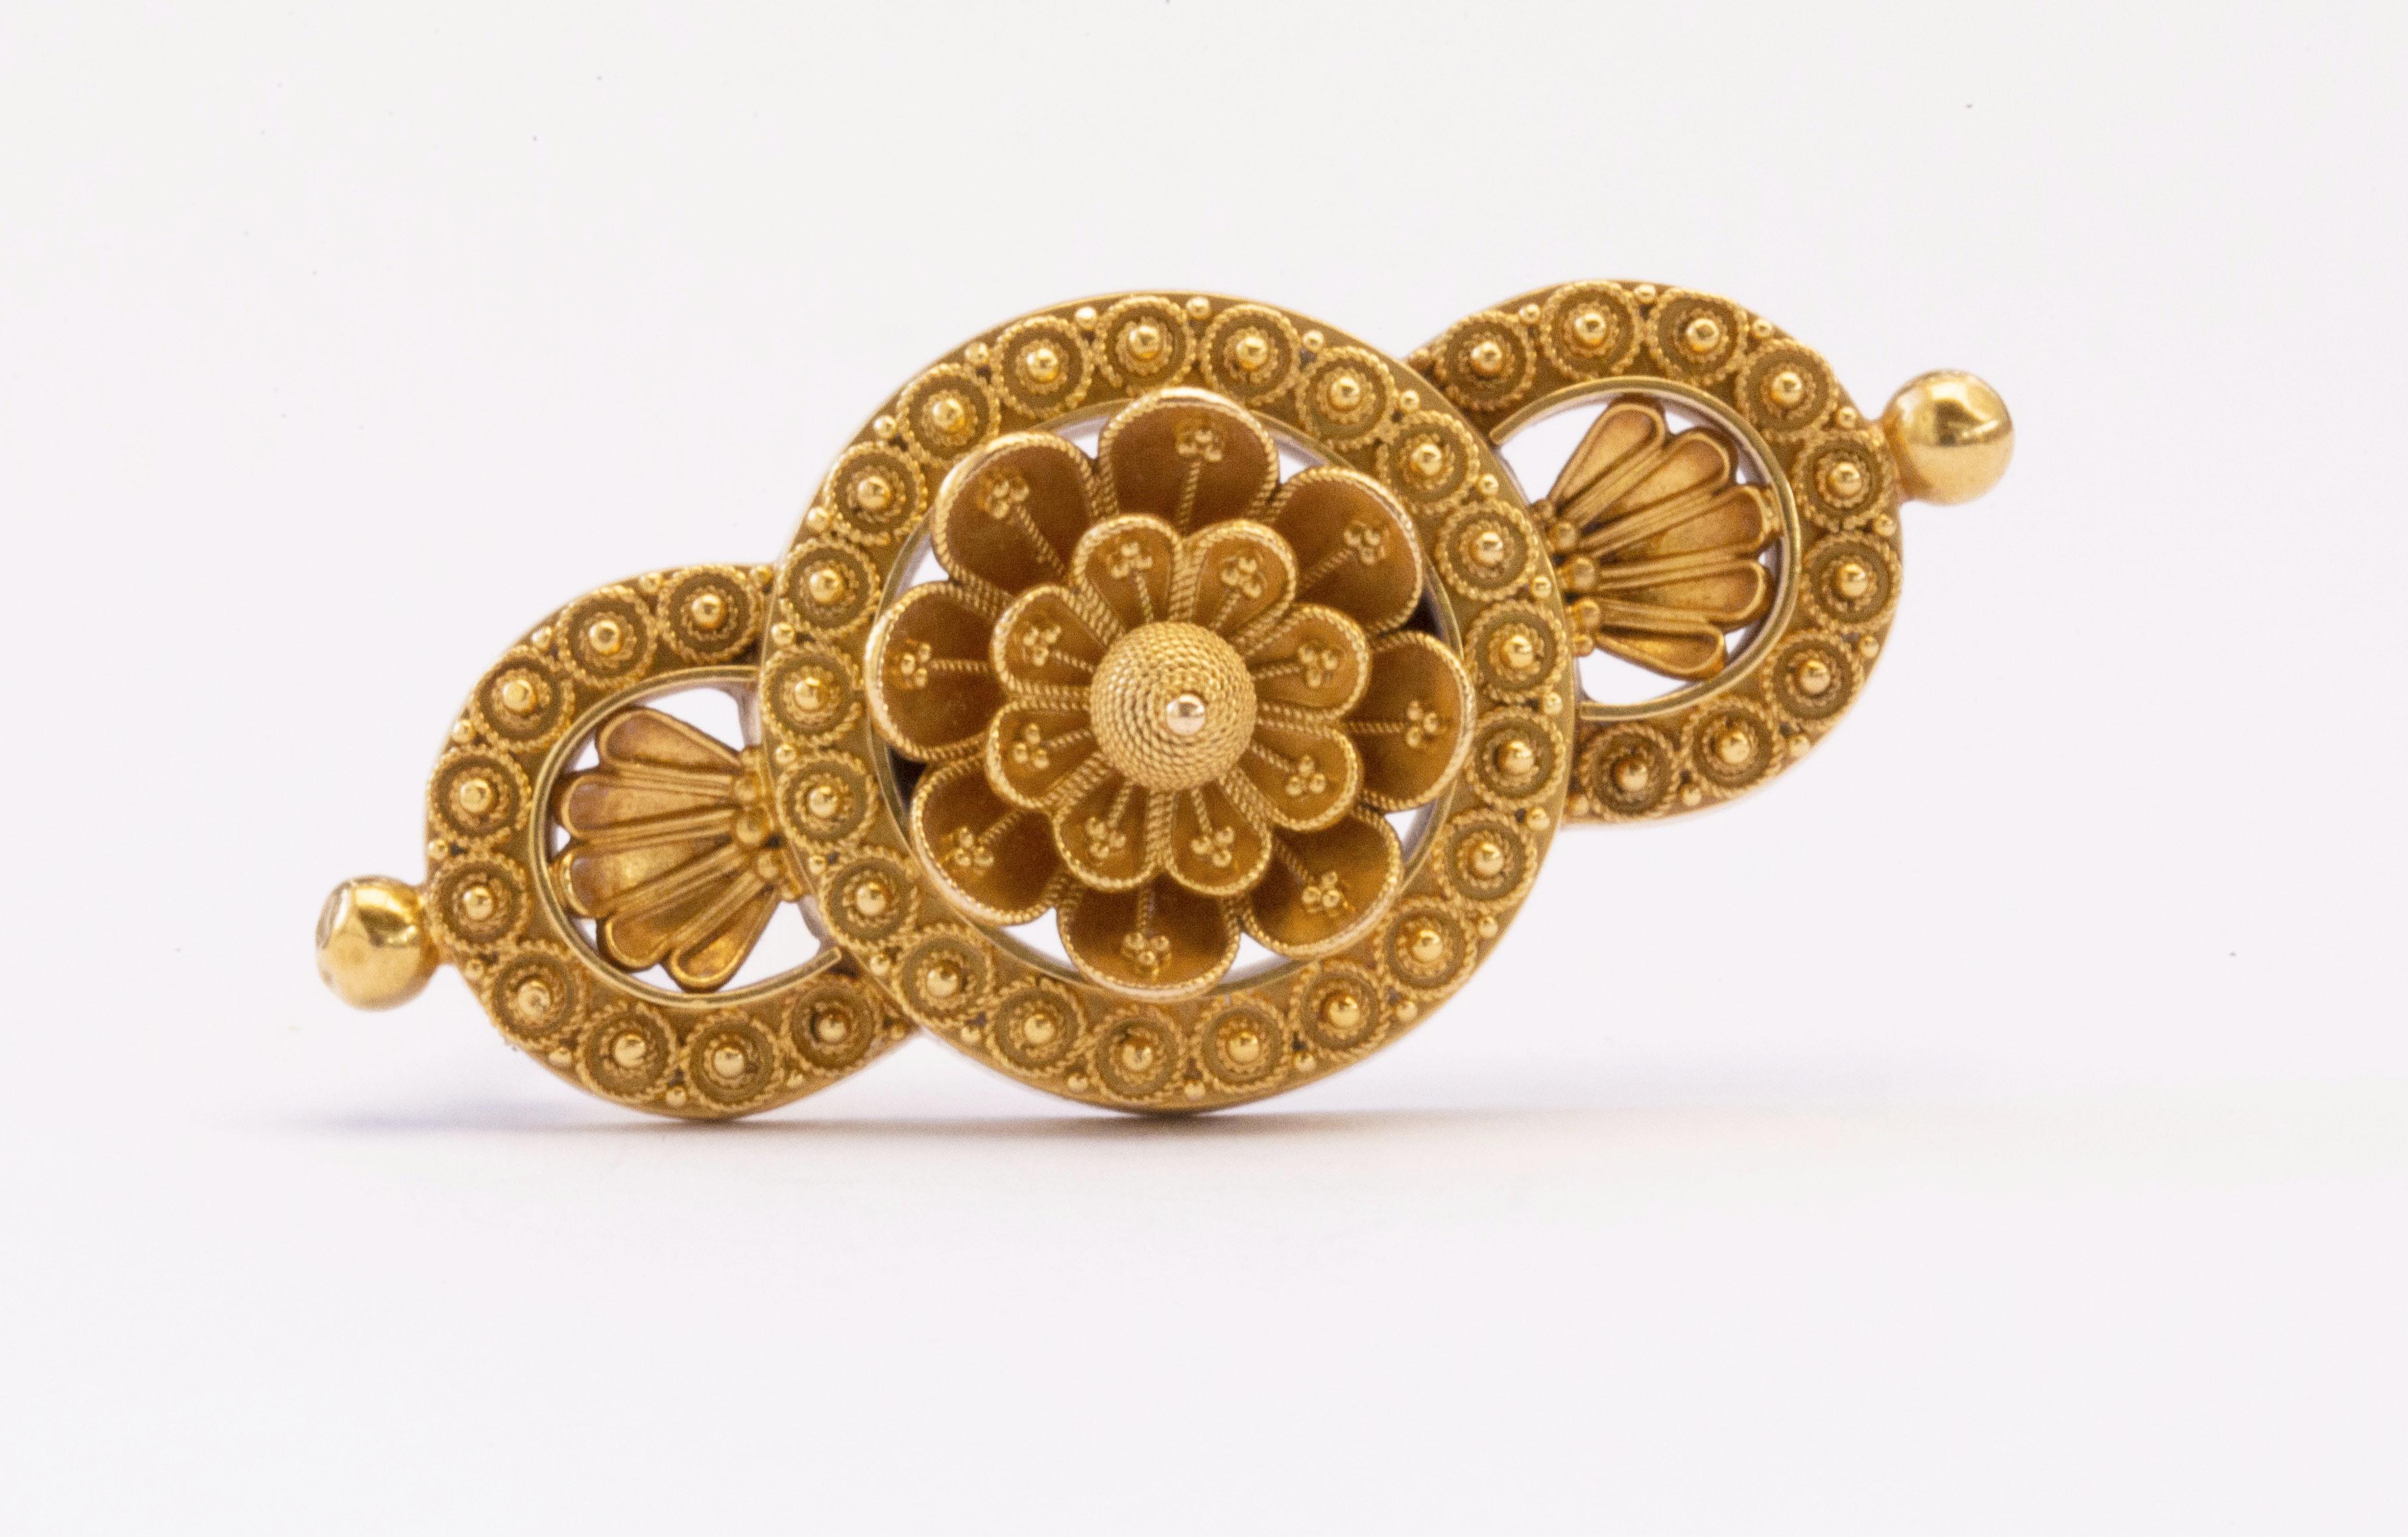 An antique Victorian English 15 karat yellow gold brooch in Etruscan Revival/ Neo Etruscan style that was characteristic from the jewelry from the Victorian Epoche in the late 19th century. The brooch features fine filigree and granule decoration